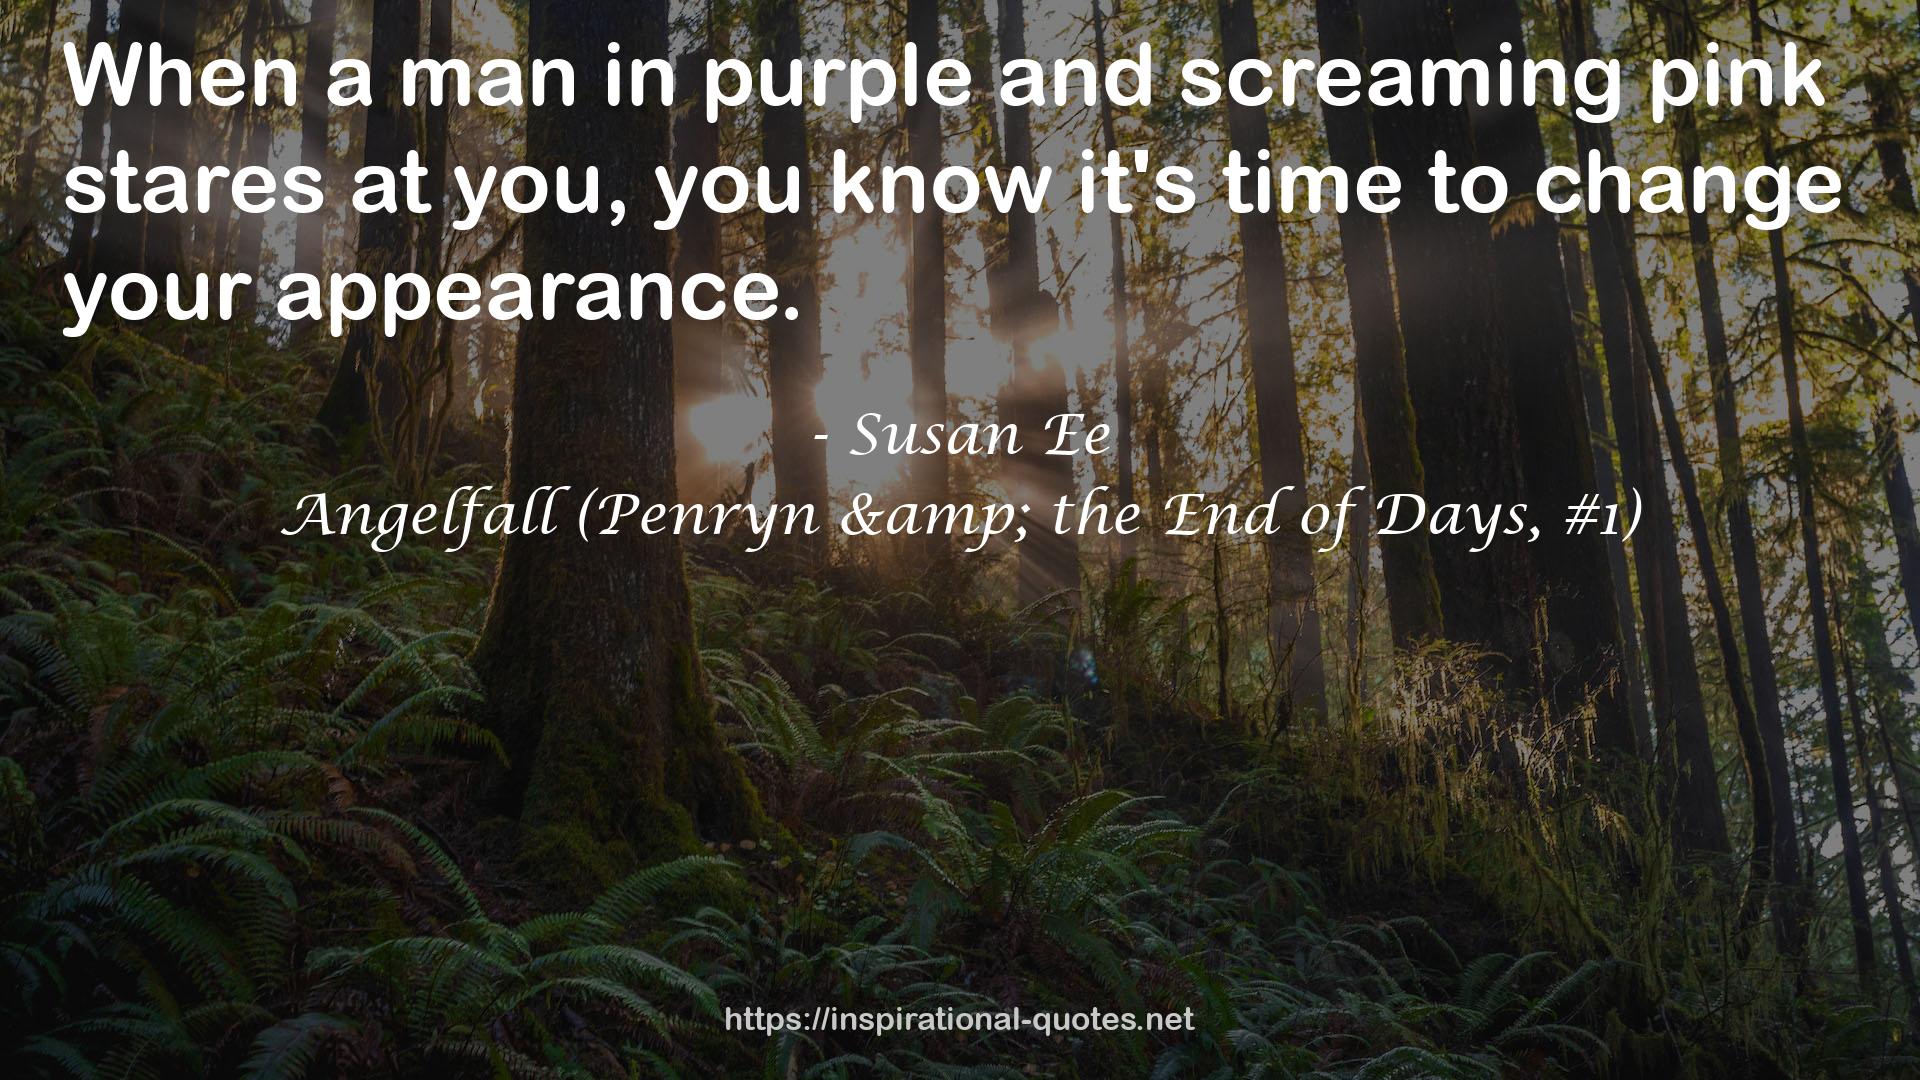 purple and screaming pink stares  QUOTES